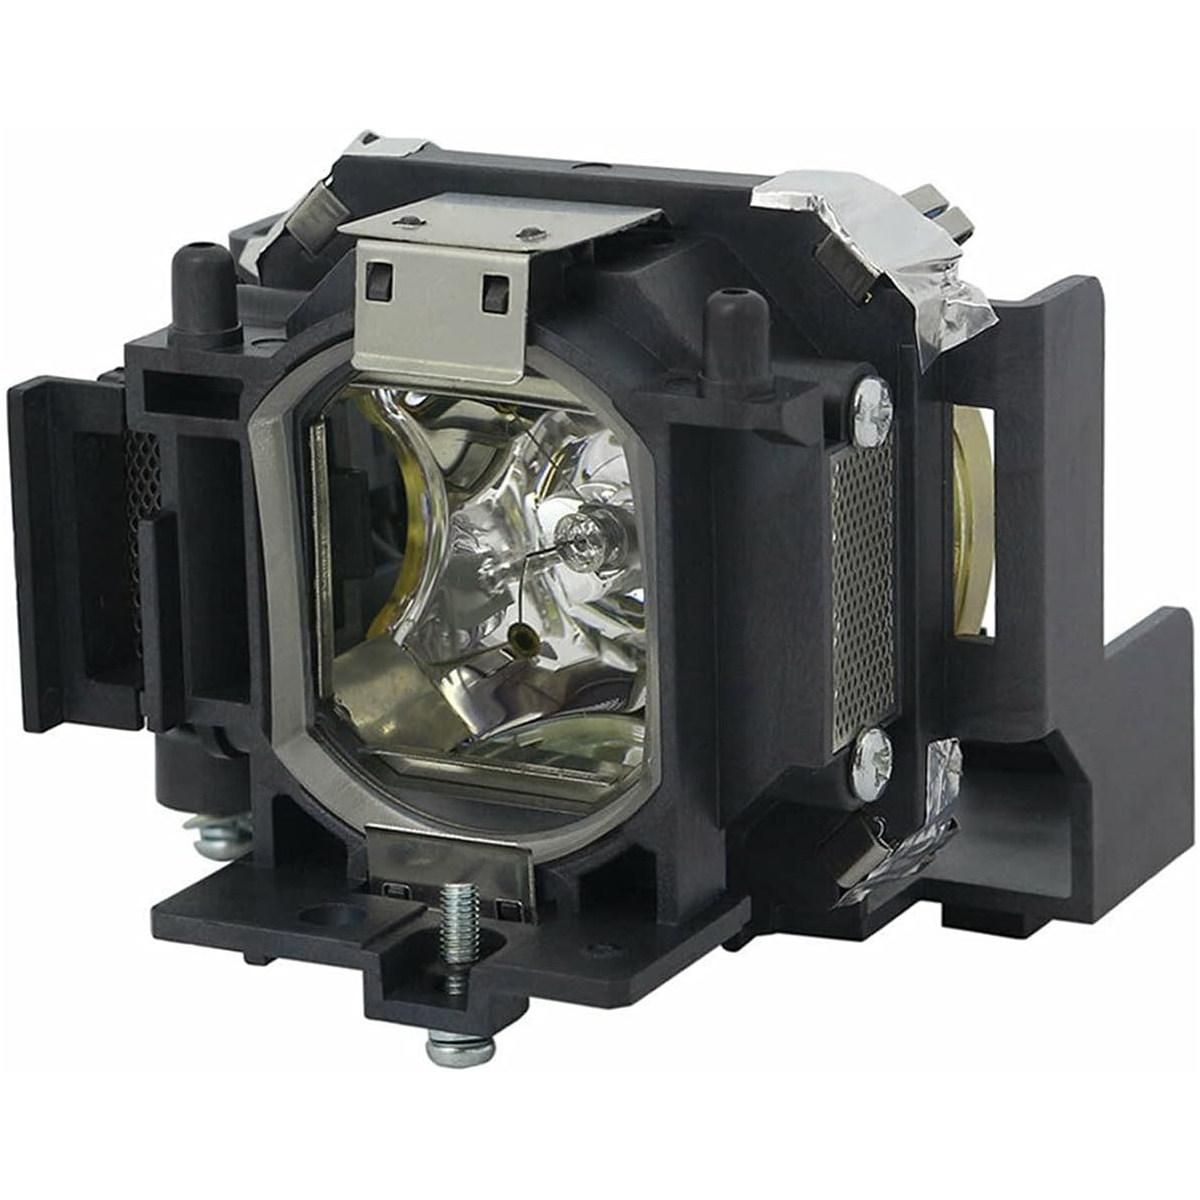 Replacement Projector lamp LMP-C190 For Sony VPL CX61 VPL CX63 VPL CX80 VPL CX85